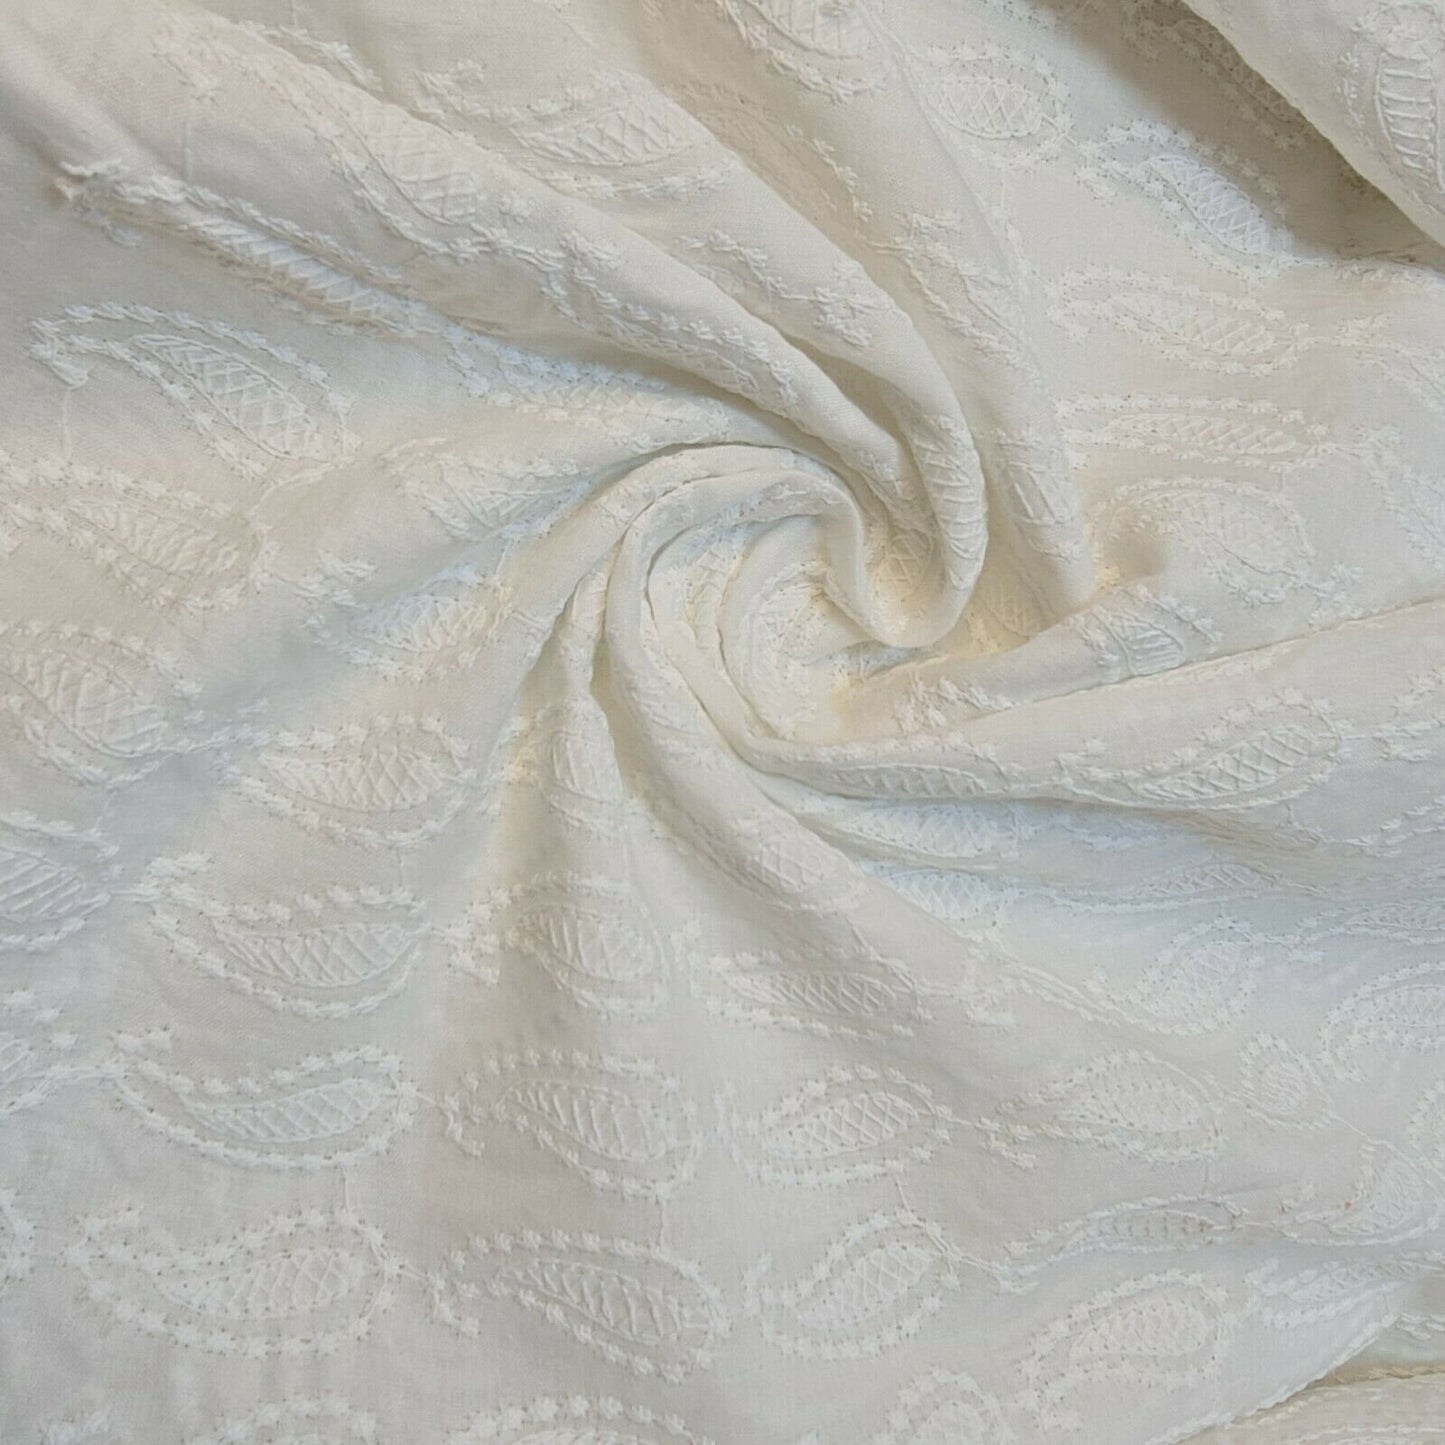 NEW 100% Cotton Lawn Broderie Anglaise Anglais Embroidery Dress Craft Fabric 44"